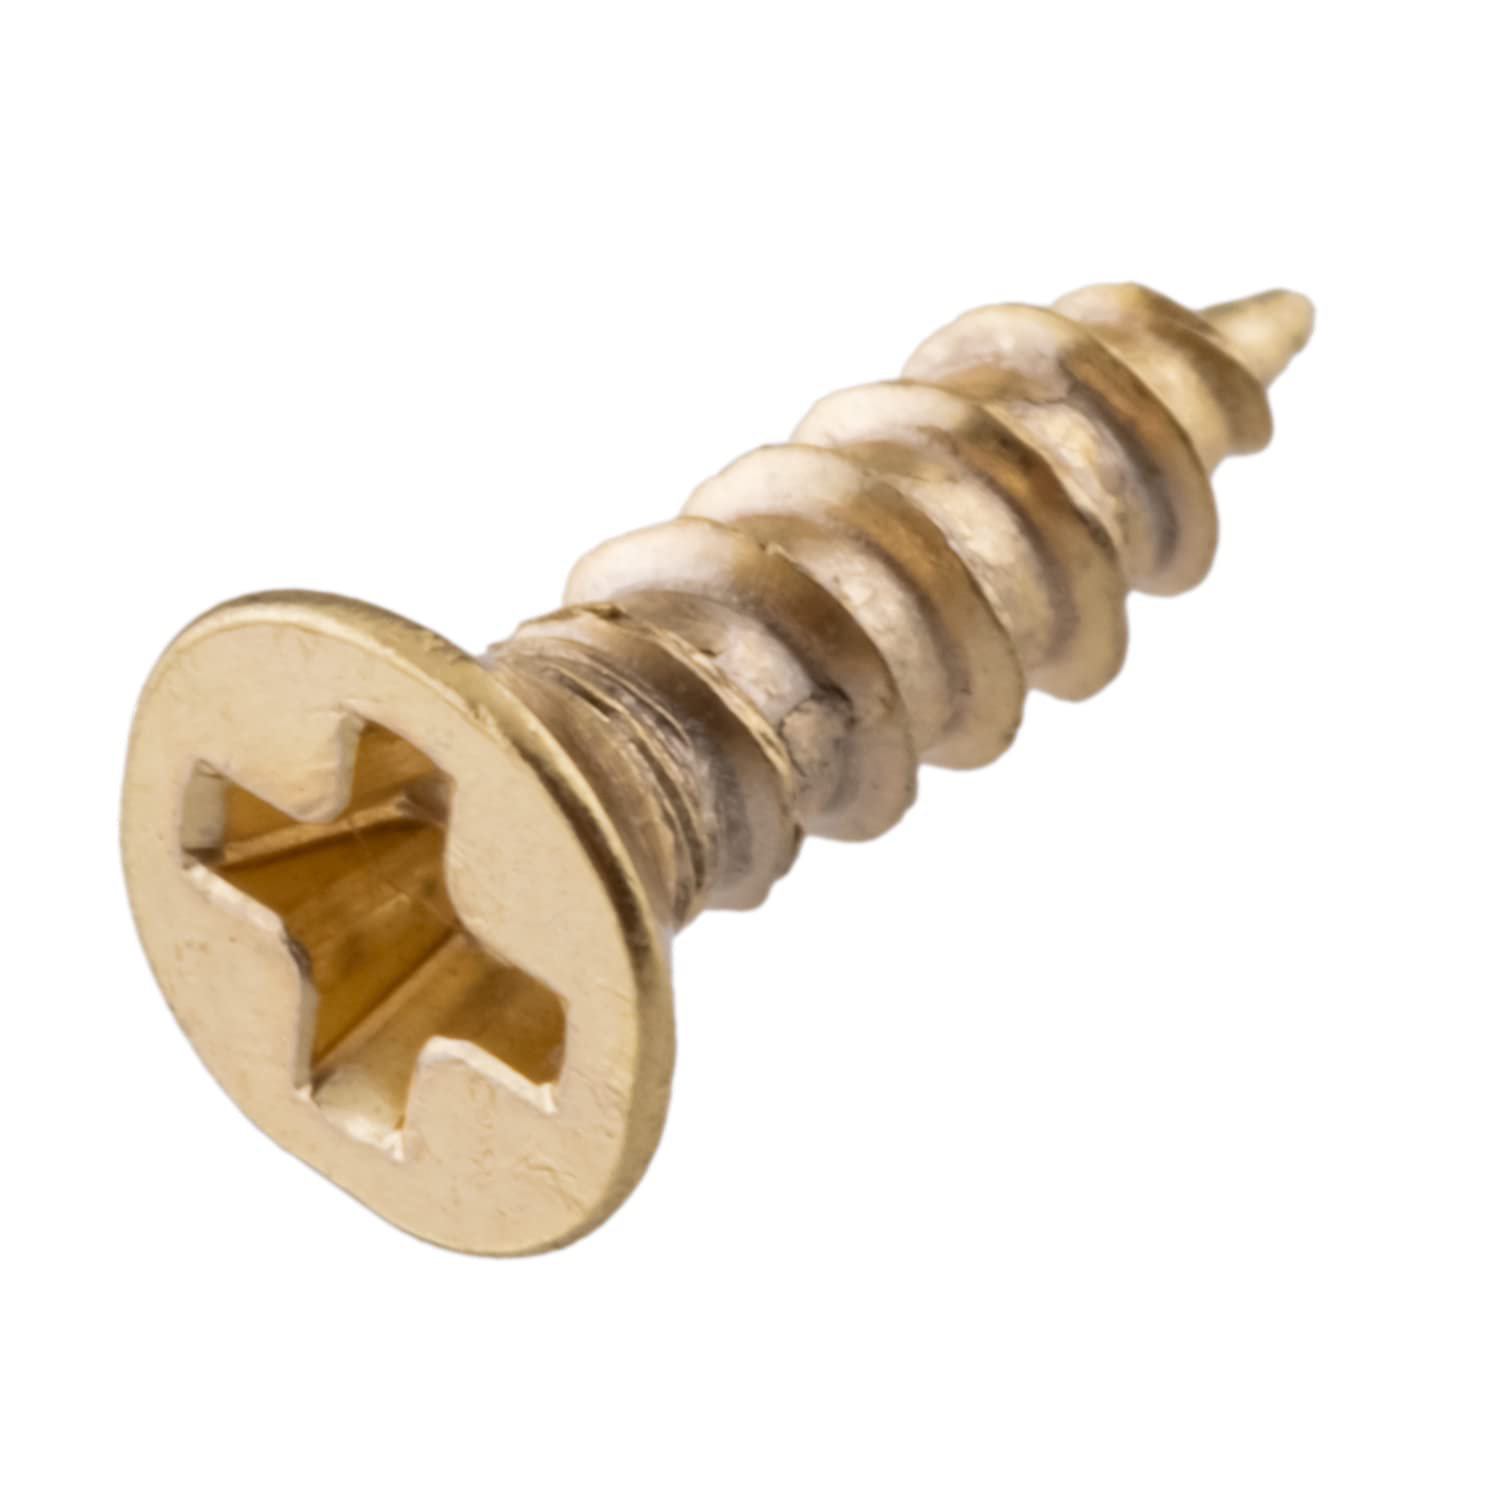 #3 x 1/2 Inch Brass Flat Head Slotted Wood Screws - 25 Pack